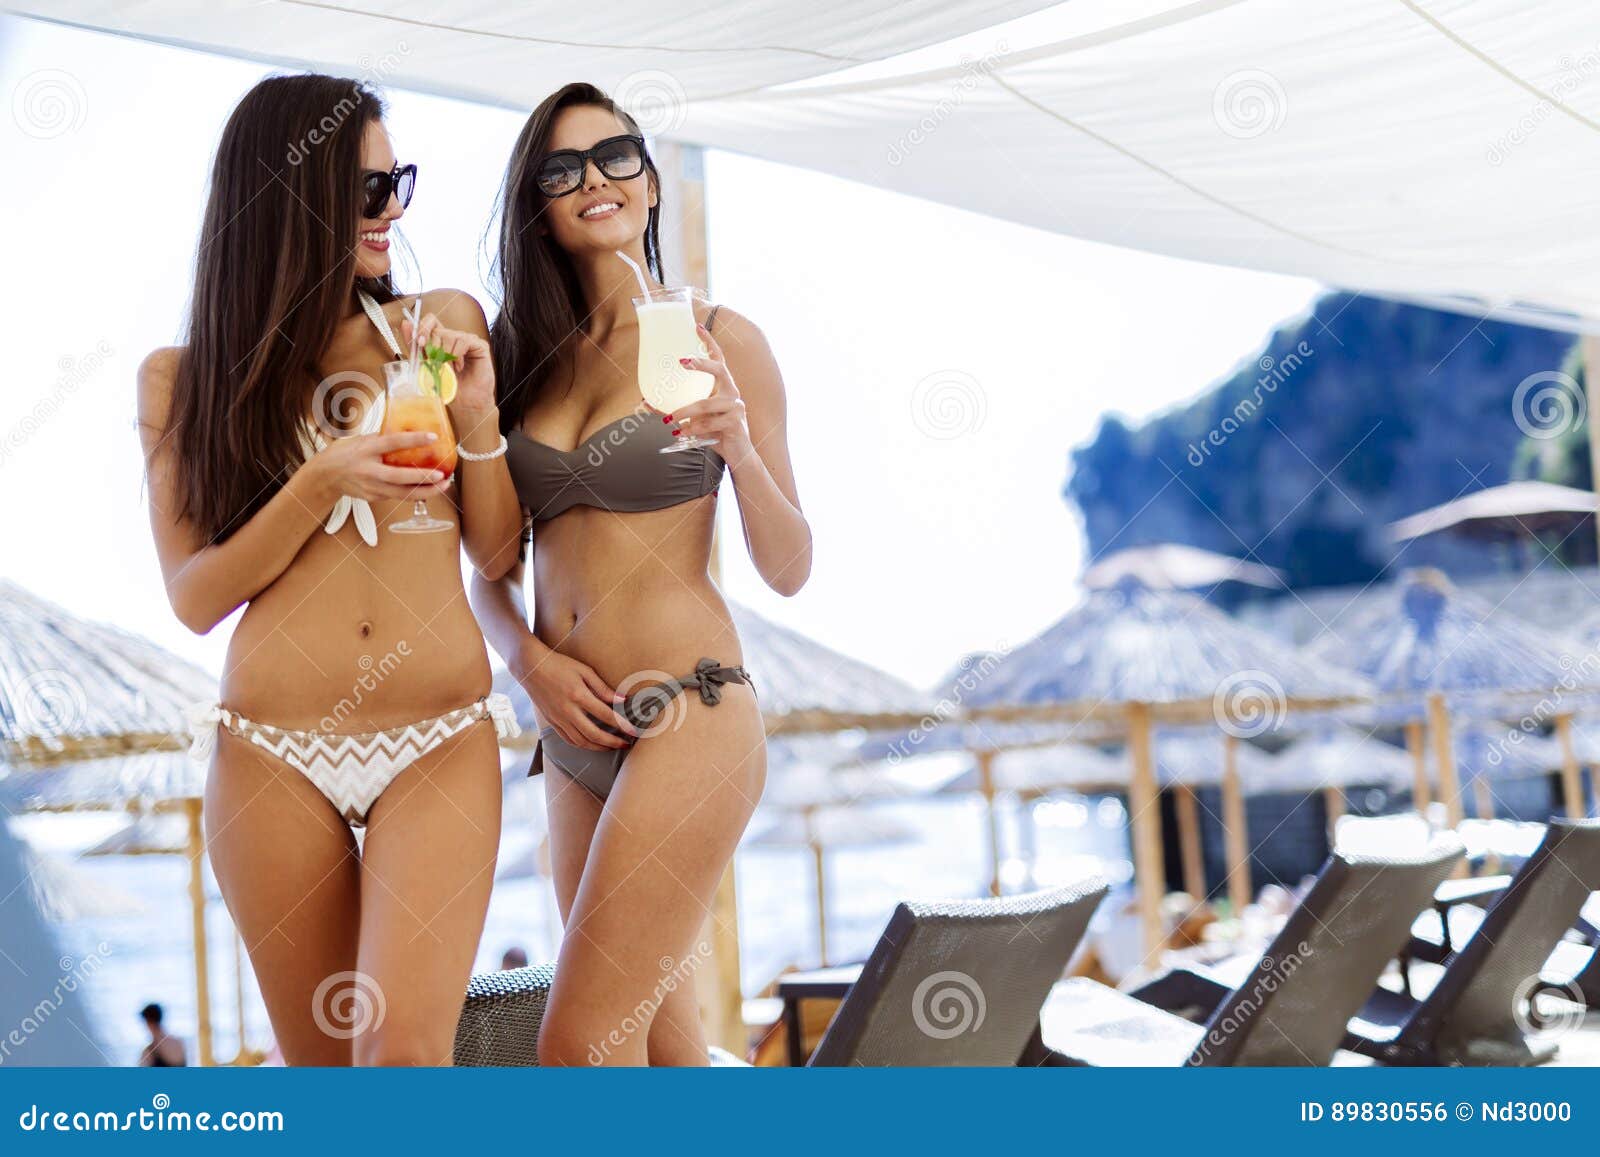 Beautiful Women on Beach Drinking Cocktails Stock Photo picture